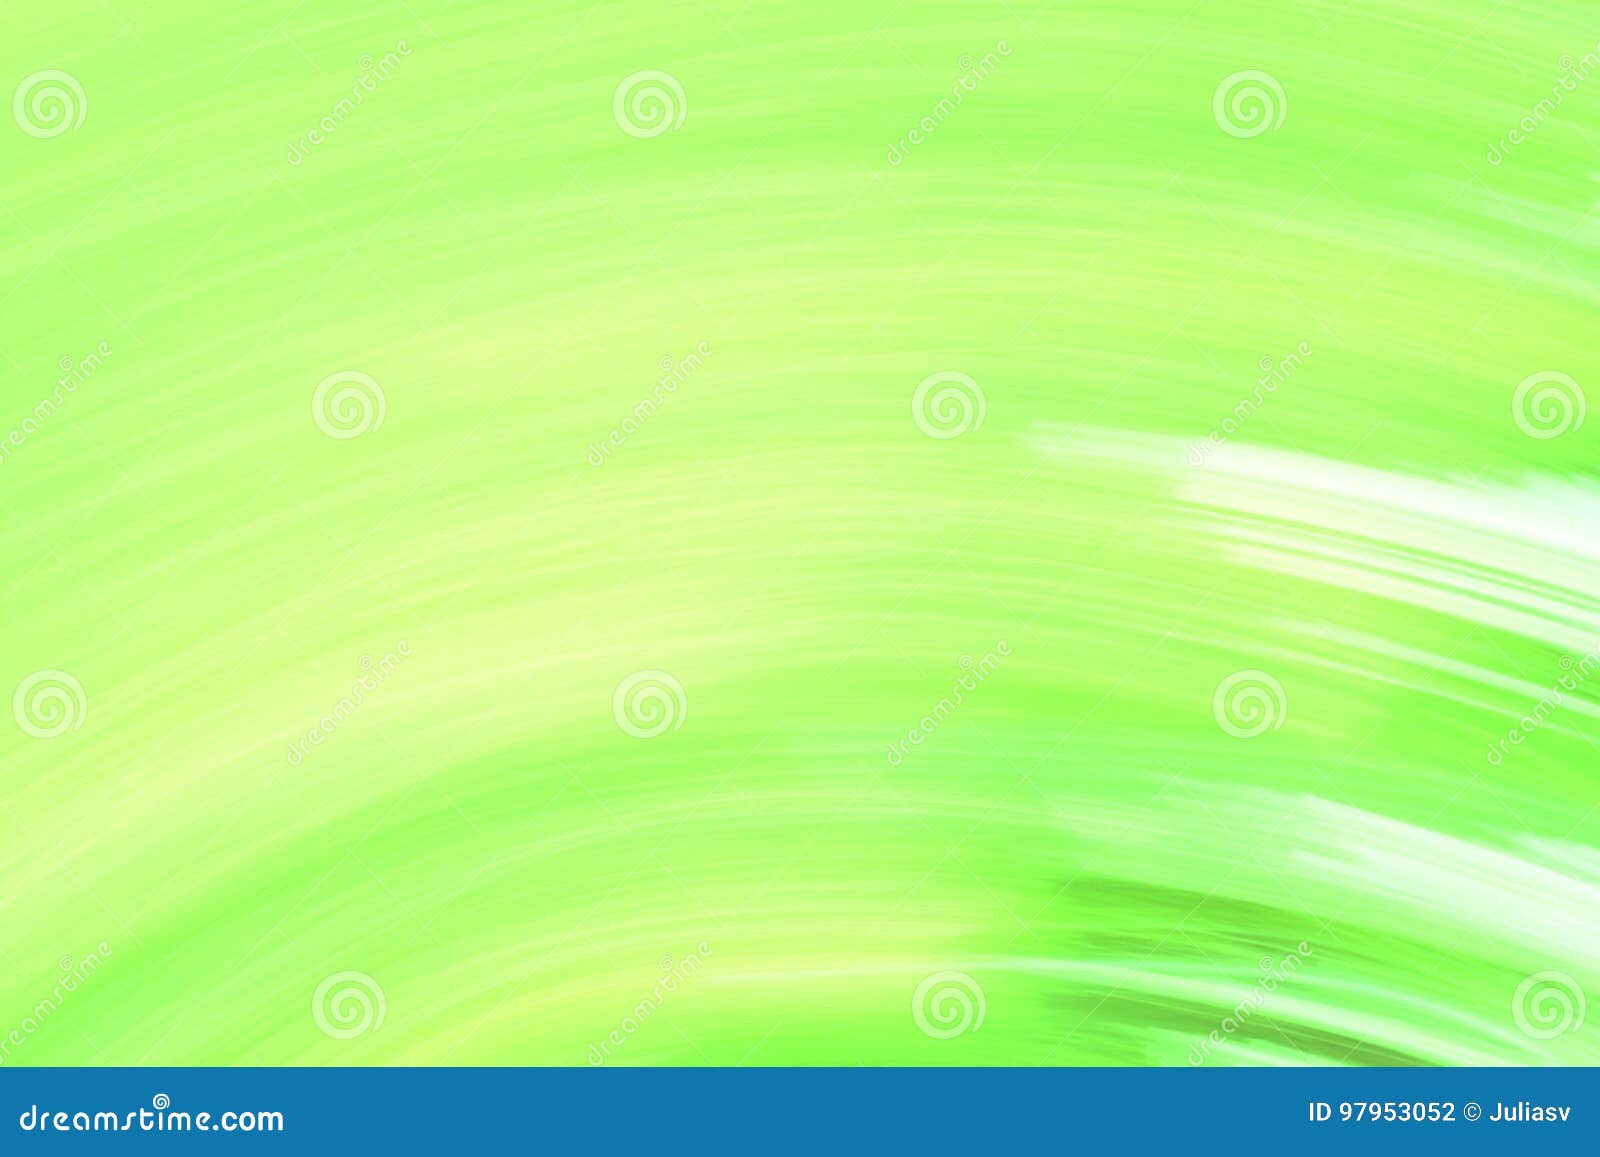 Blurred Background With Green And White Color Stock Photo